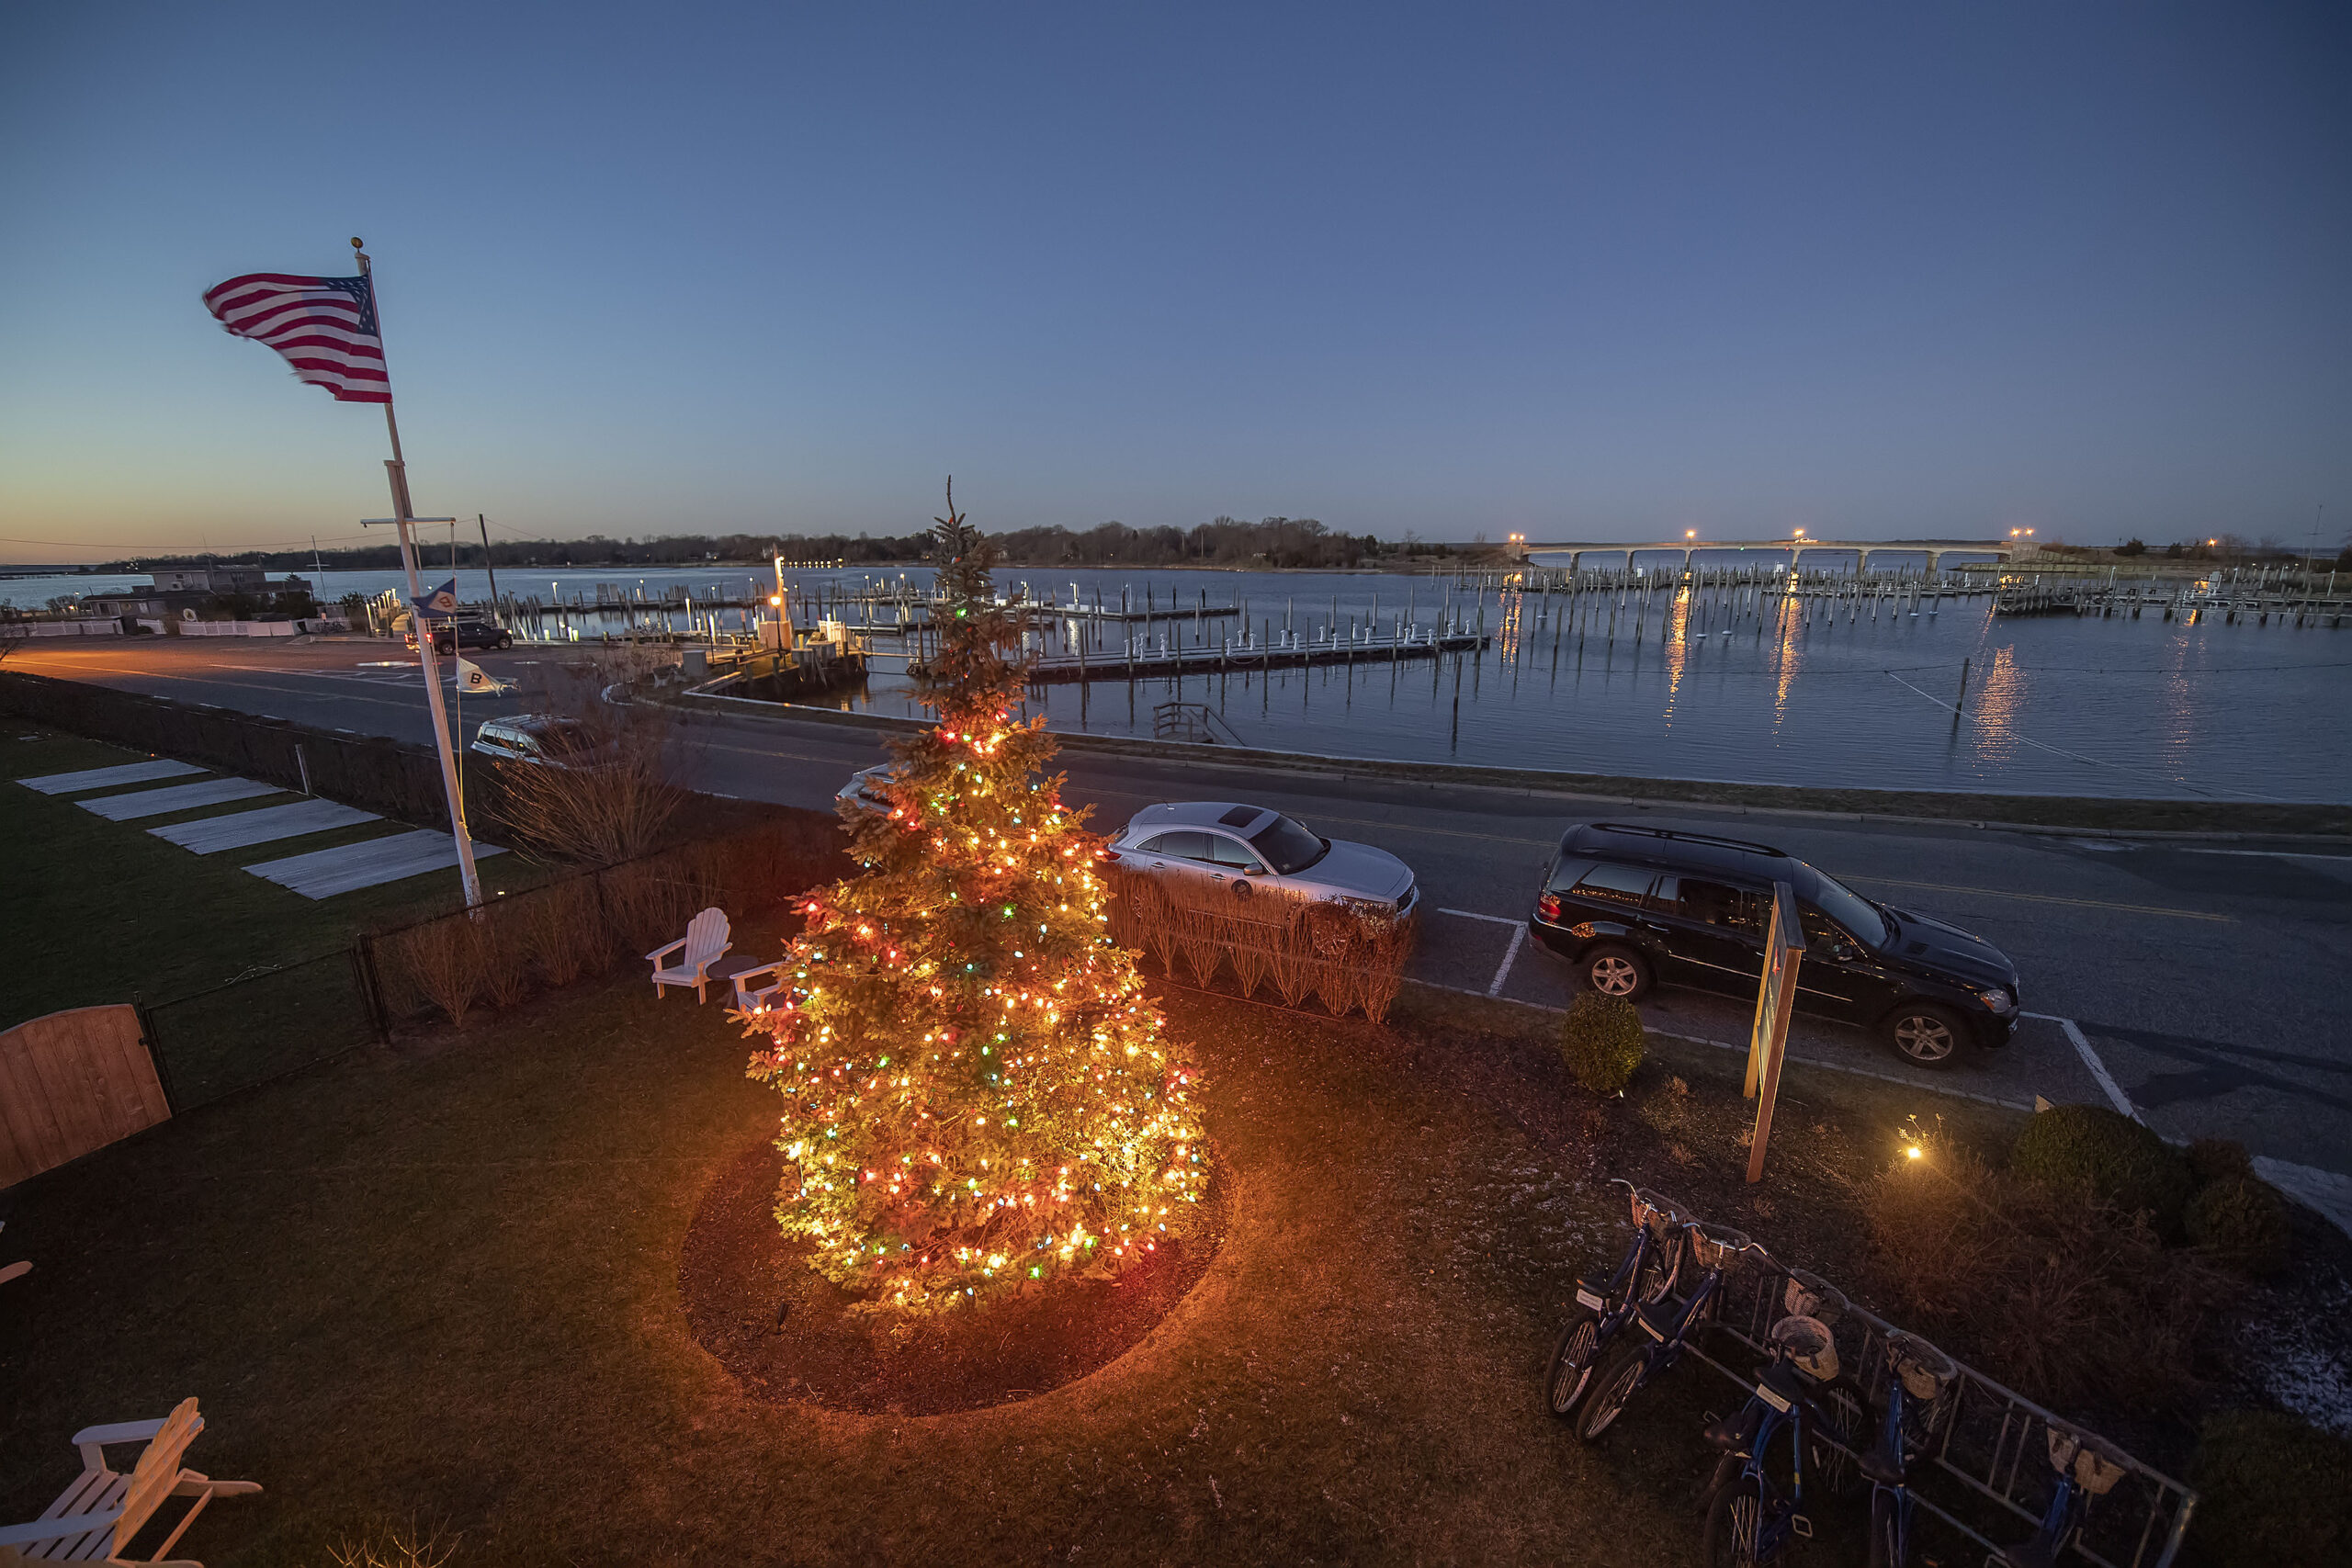 The annual Barons Cove tree lighting ceremony in Sag Harbor will take place December 3, at 6:30 p.m. MICHAEL HELLER